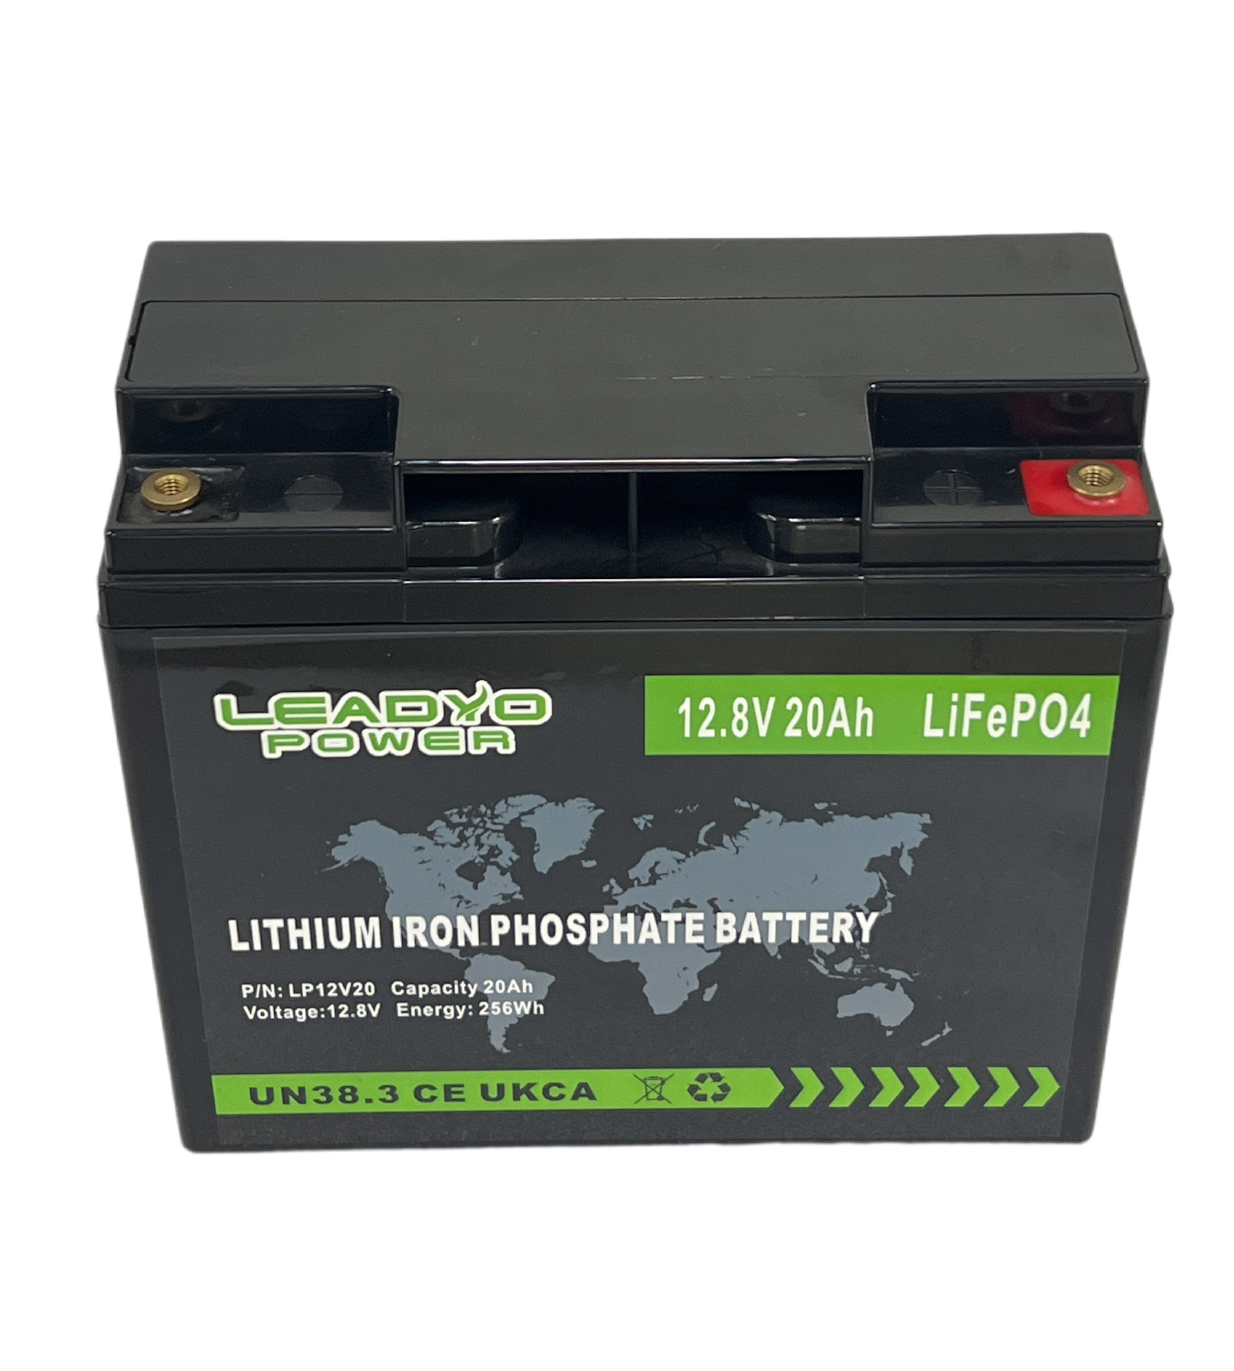 Leadyo Power: Redefining Power Solutions with LiFePO4 Batteries